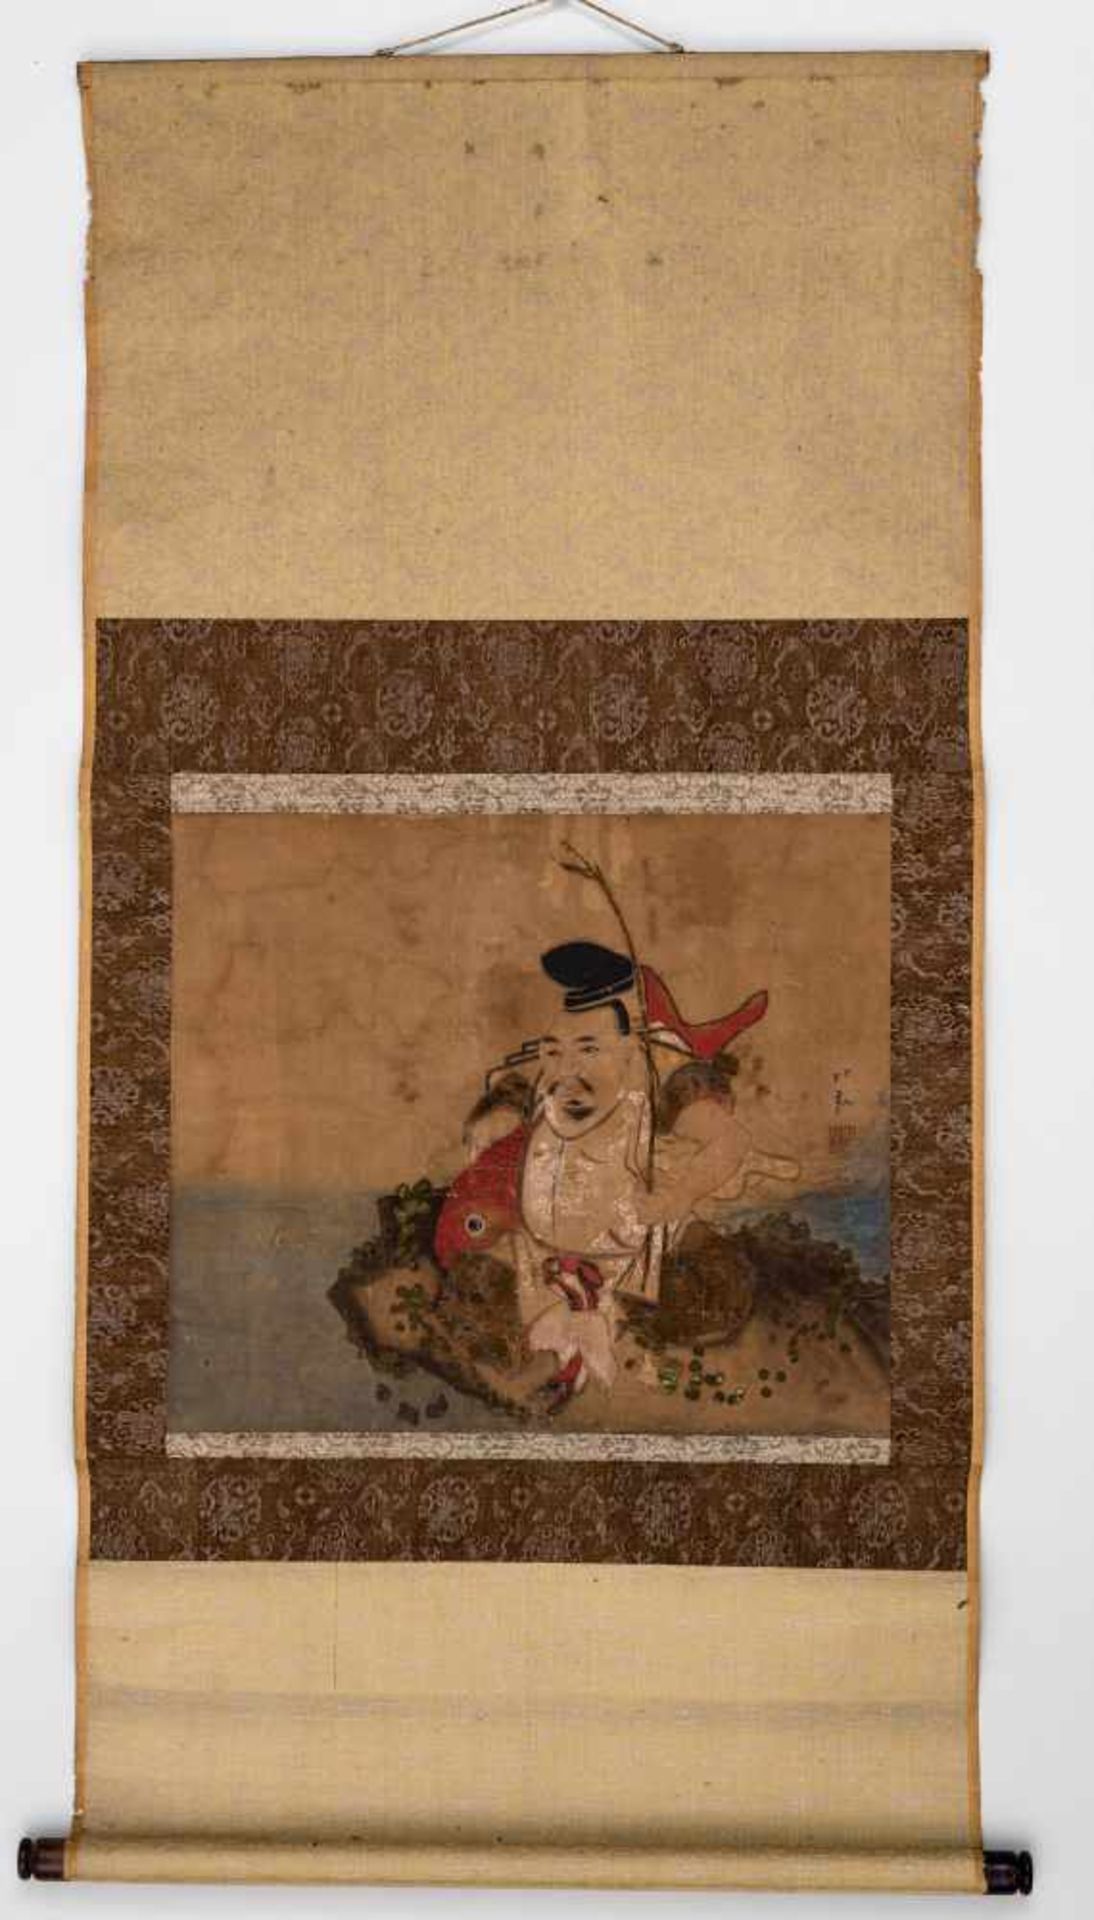 JAPANESE SCROLL PAINTING WITH EBISU - 19th CENTURYInk and gouache on paper, mounted to a brocade - Image 2 of 4